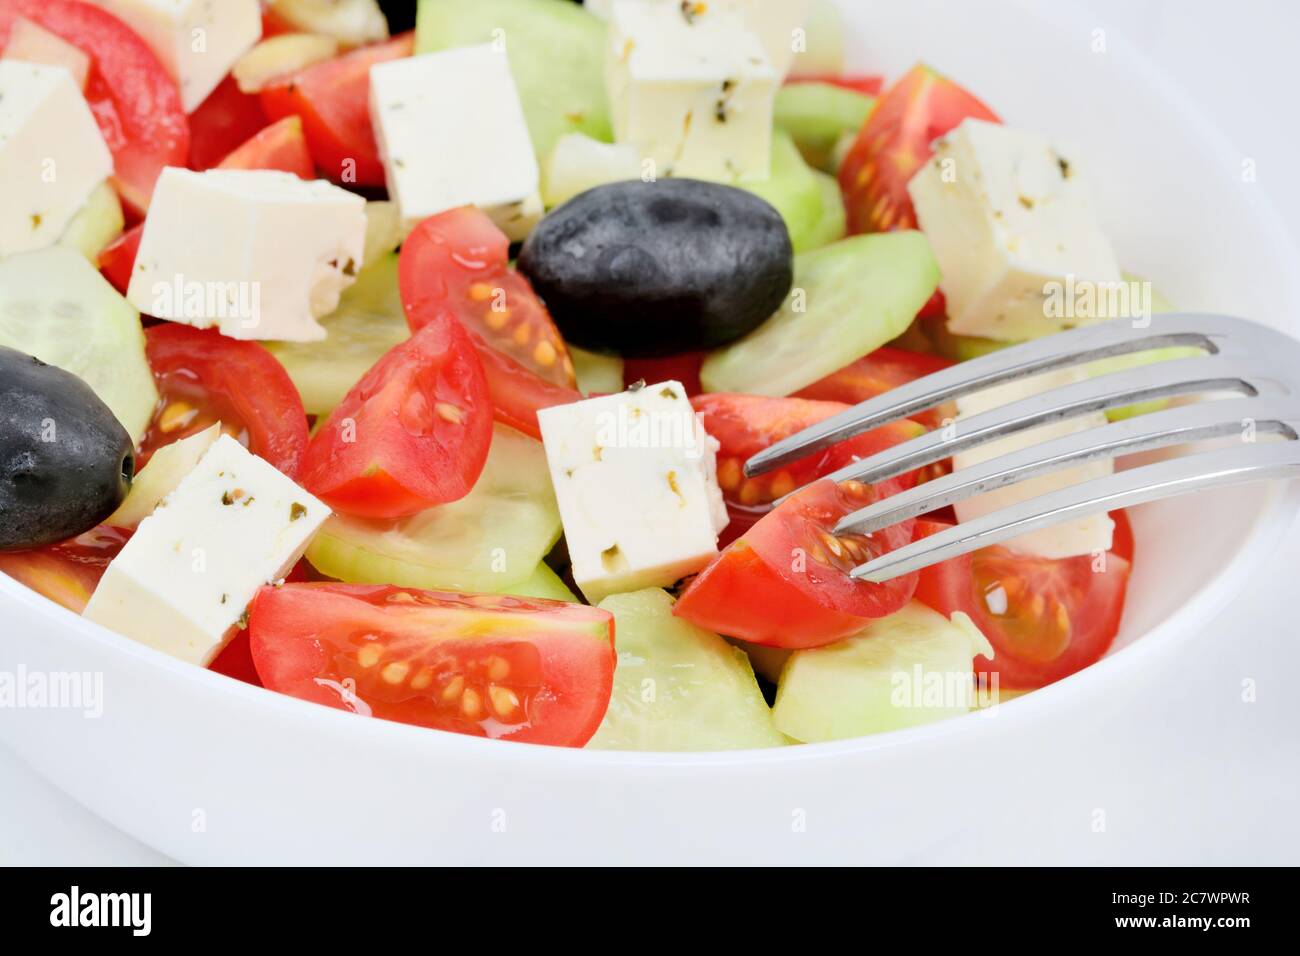 Vegetables salad with cheese in a bowl Stock Photo